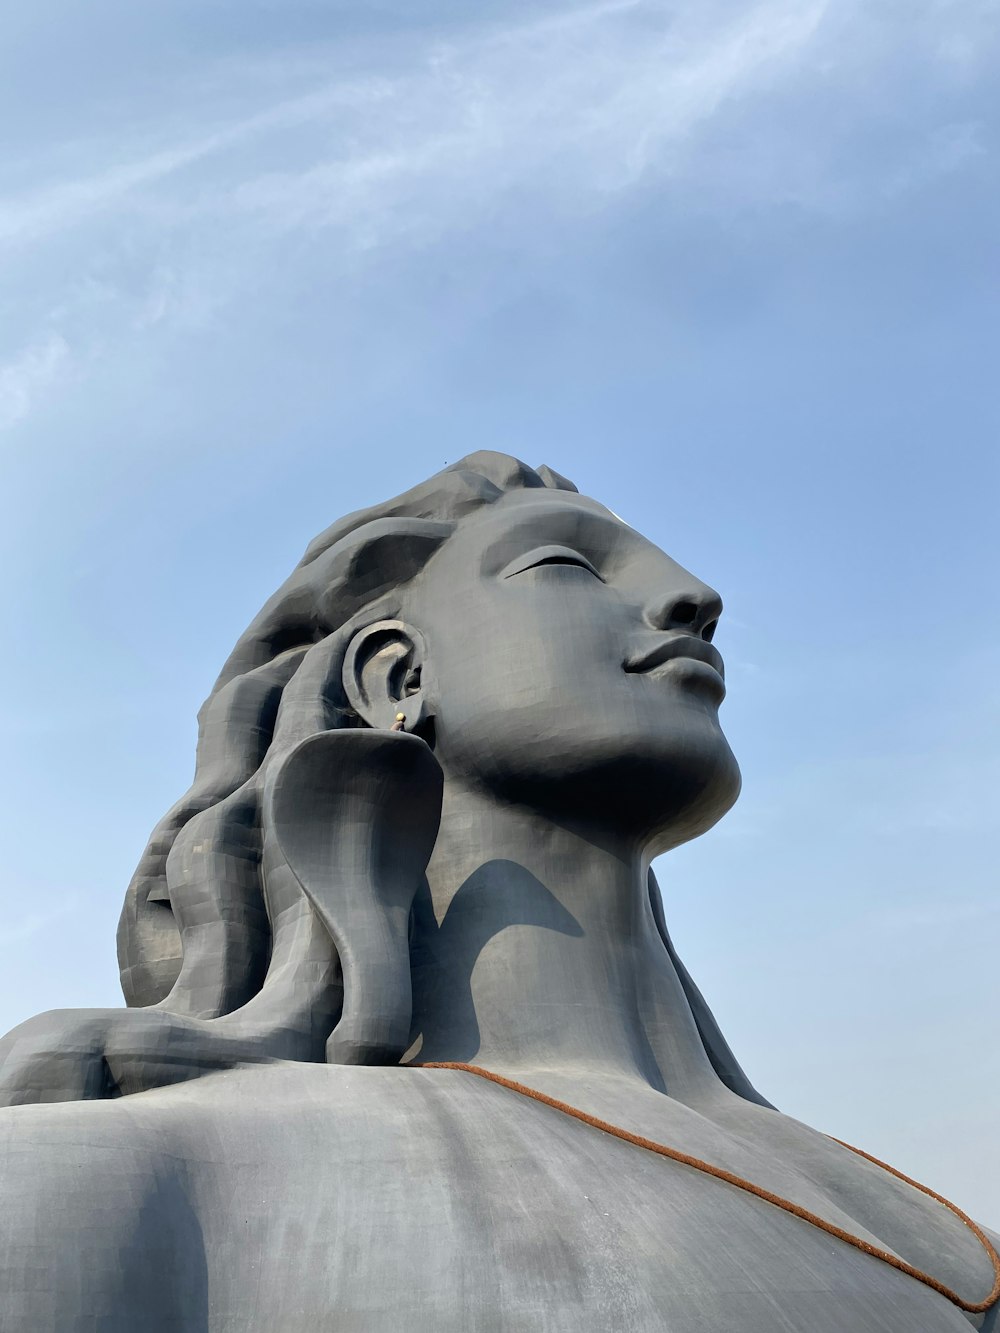 gray concrete statue under blue sky during daytime